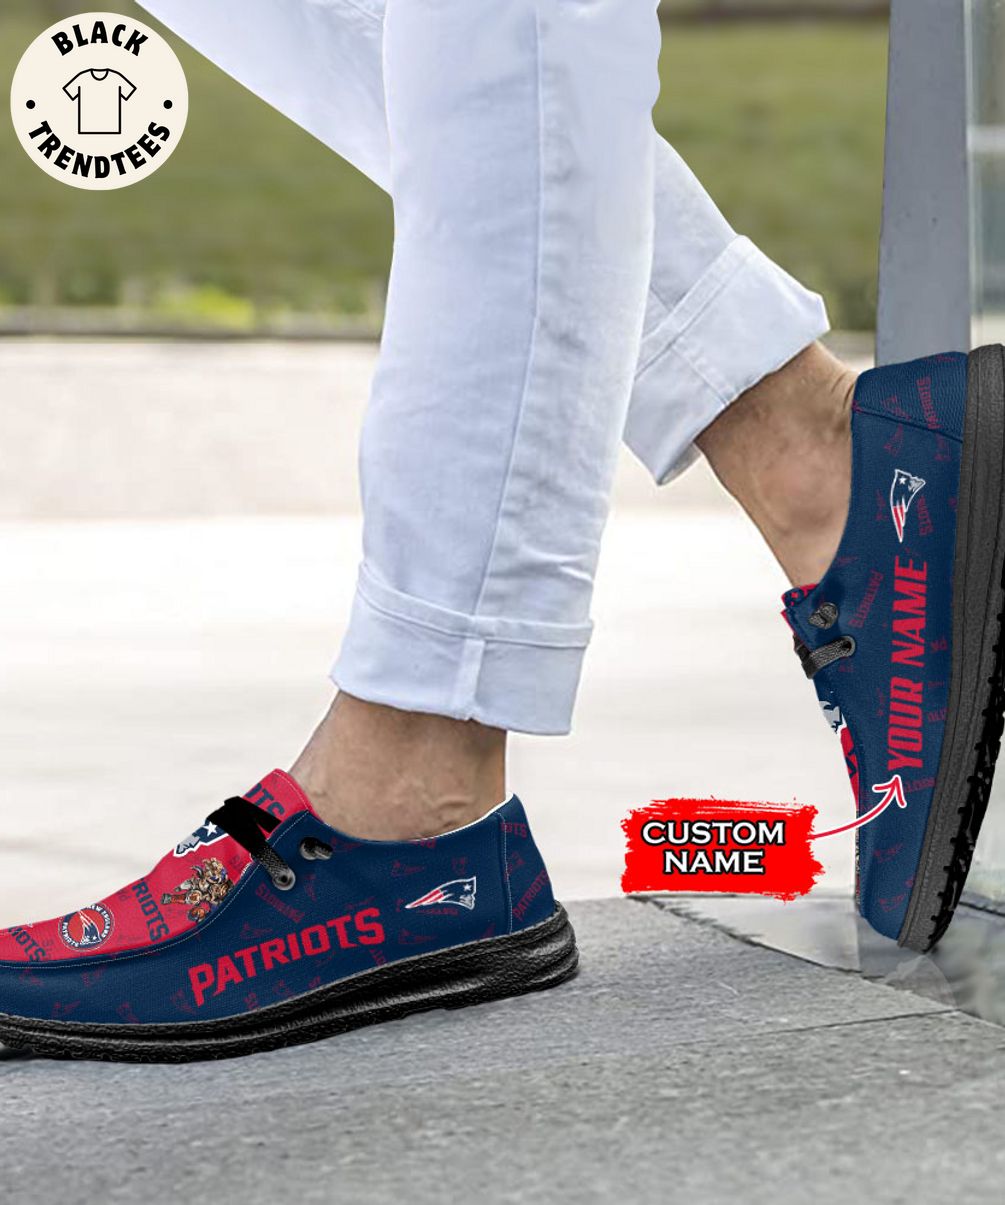 THE BEST NFL New England Patriots Custom Name Hey Dude Shoes